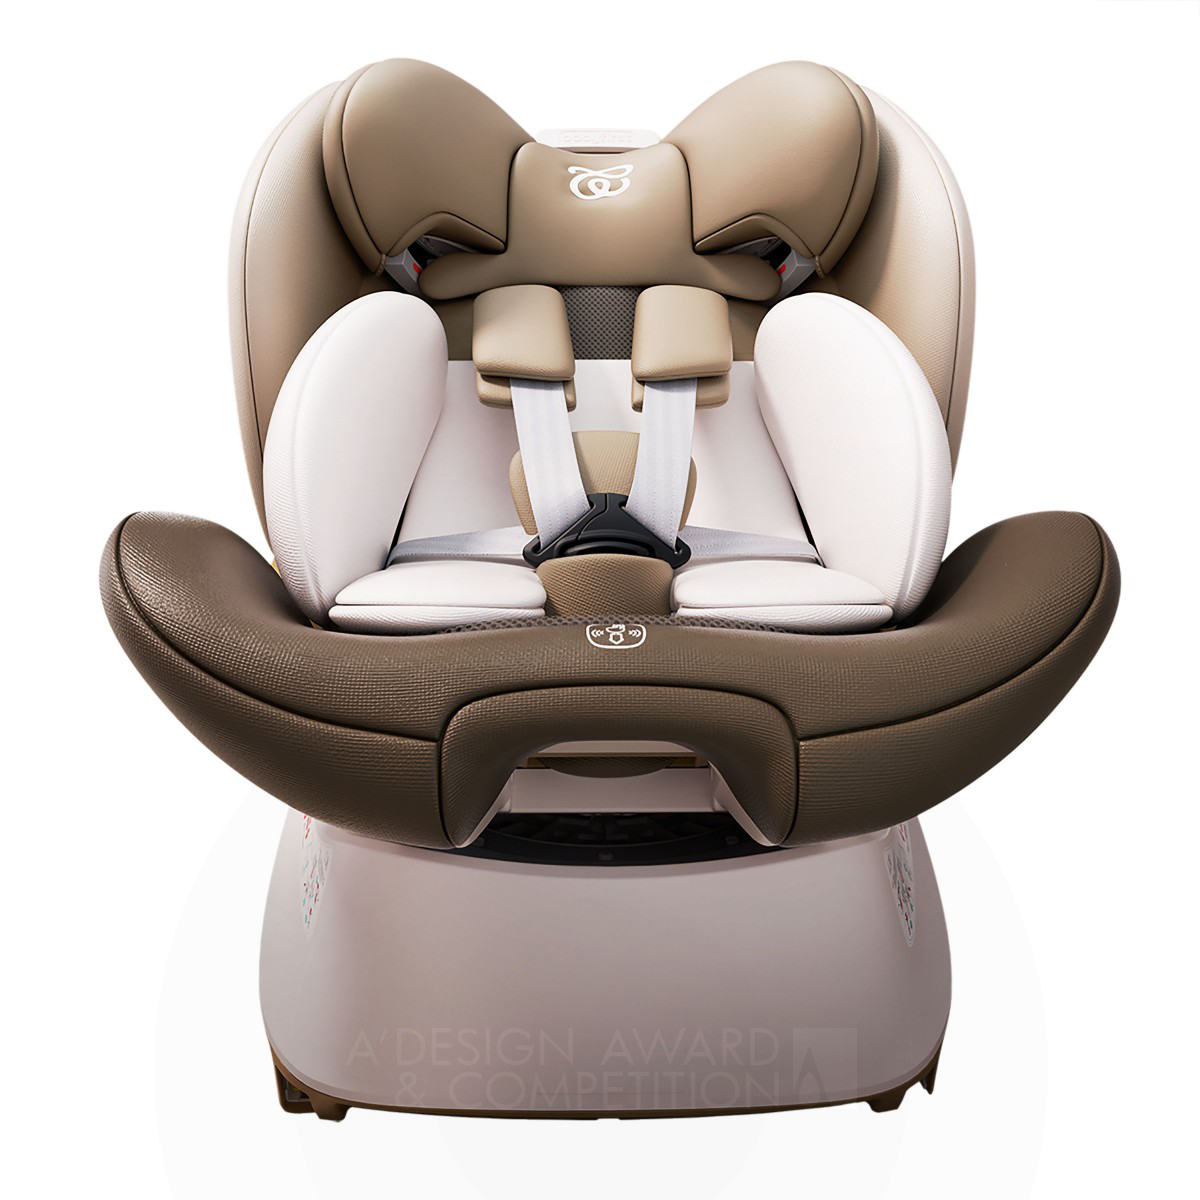 Babyfirst Genius Pro R156 Safety Seats by Ningbo Baby First Baby Products Co., Ltd. Golden Baby, Kids' and Children's Products Design Award Winner 2024 